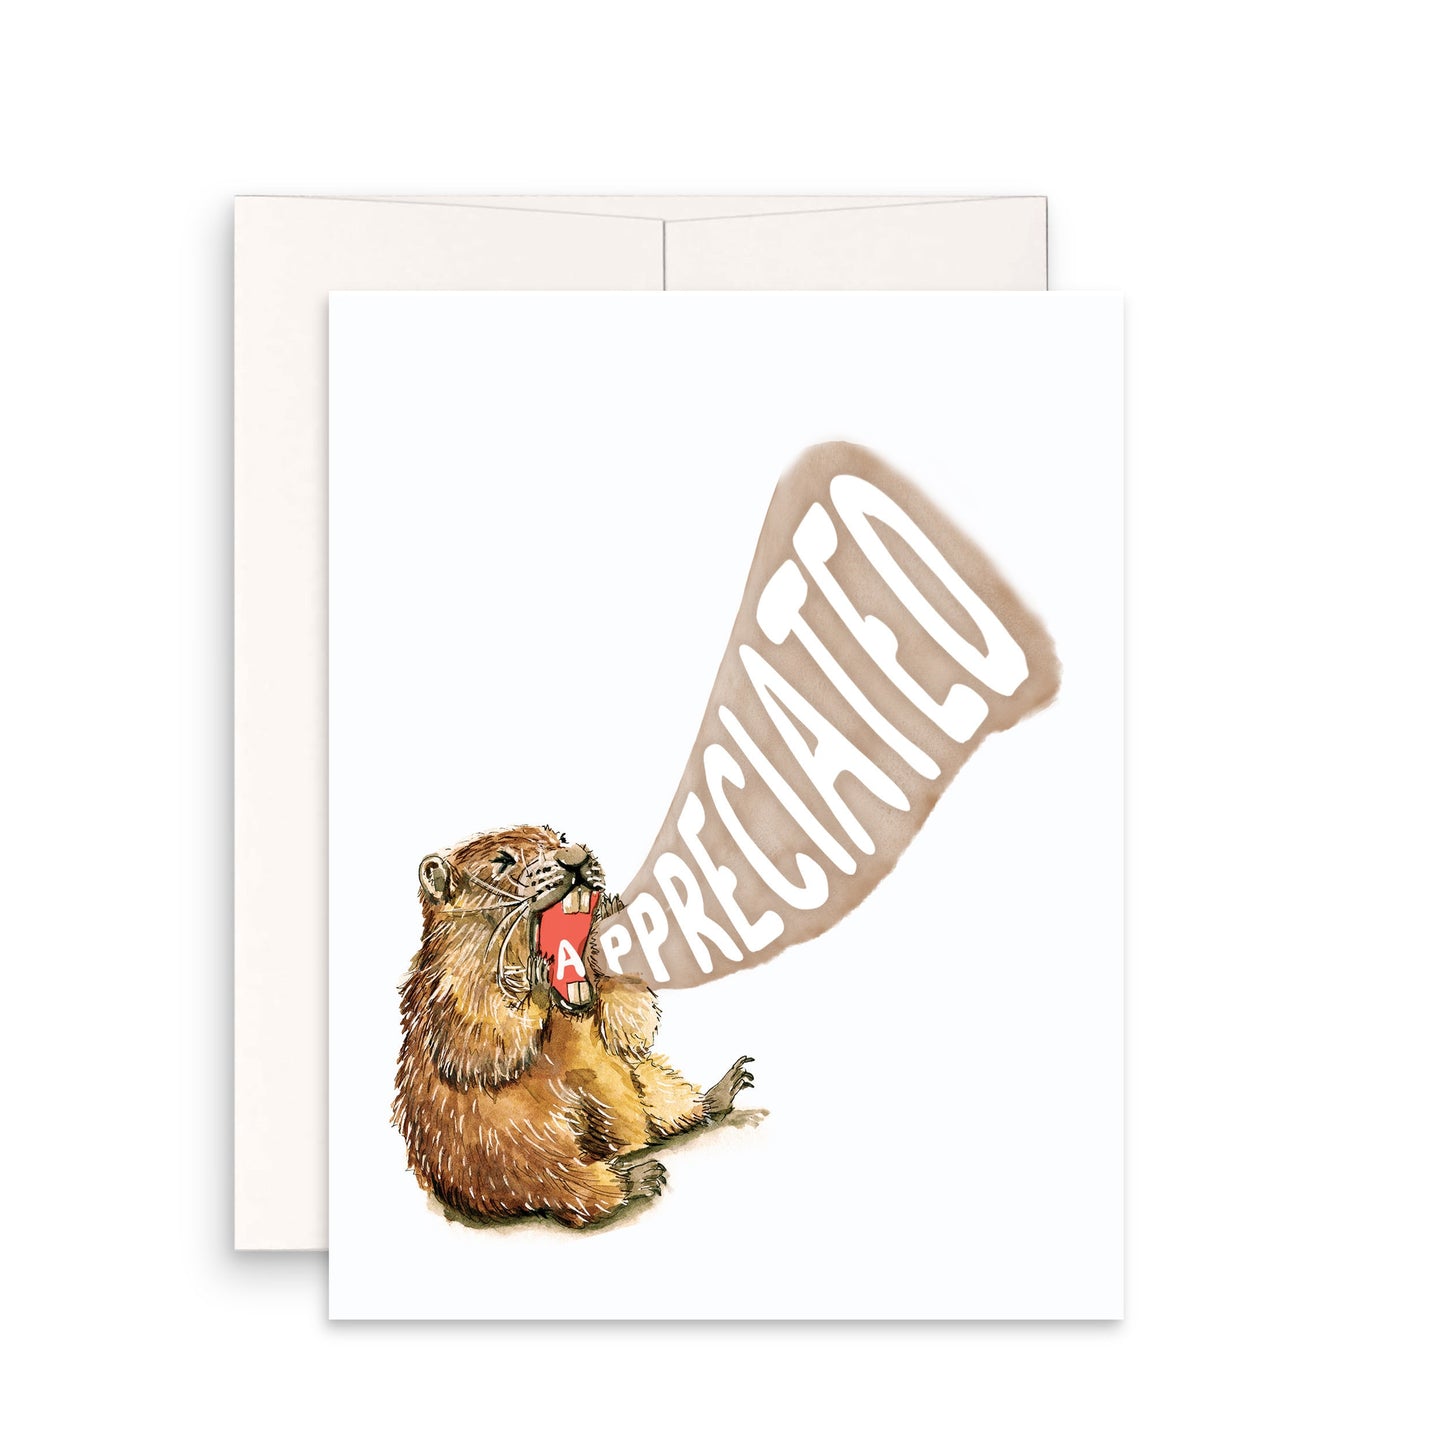 Screaming Marmot Funny Thank You Cards Set - Appreciate Card For Friends